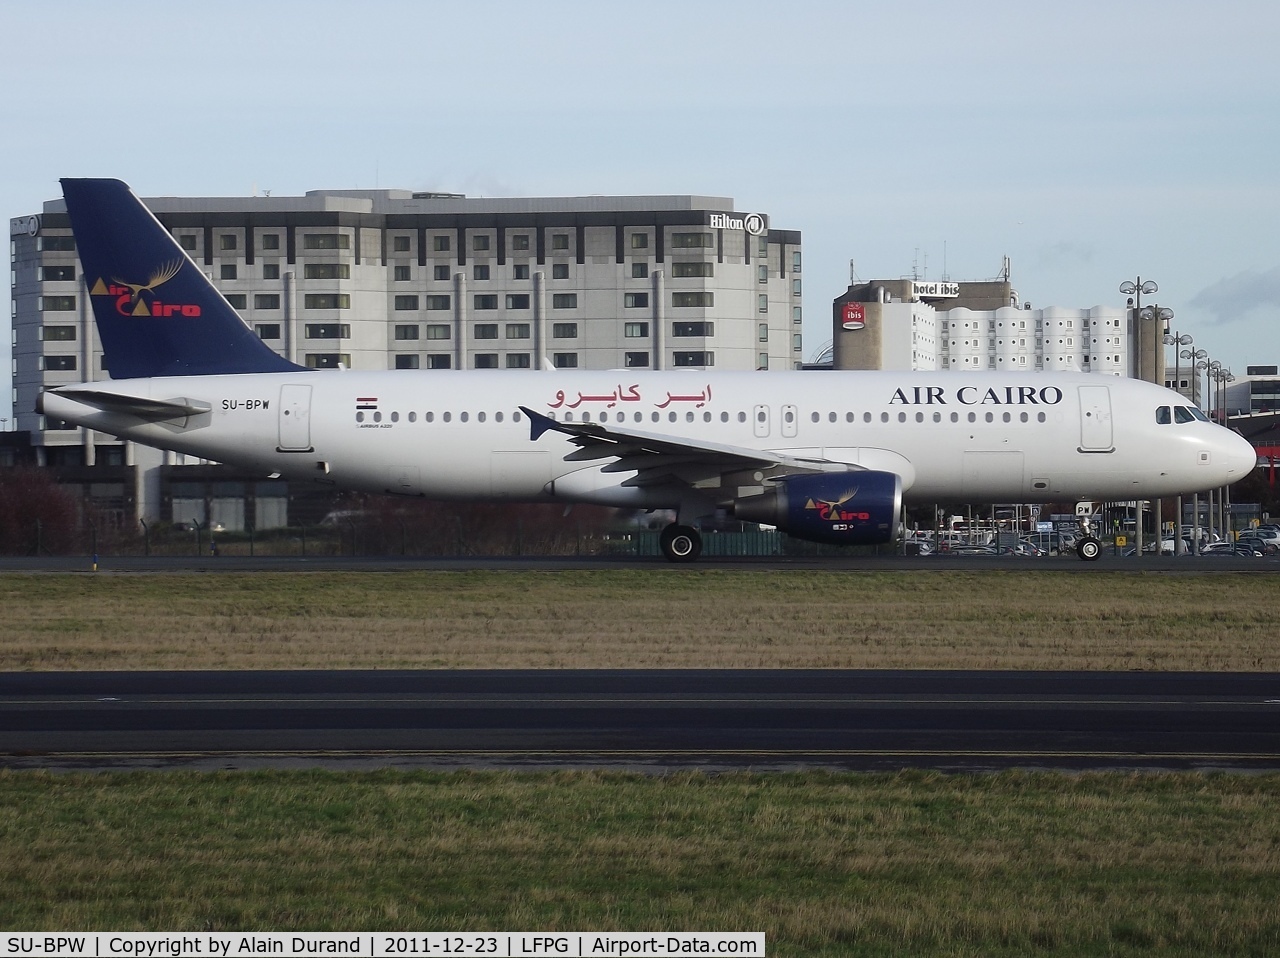 SU-BPW, 2007 Airbus A320-214 C/N 3282, Delivered new to Air Cairo, Papa-Whisky was heading to southside runway 26R